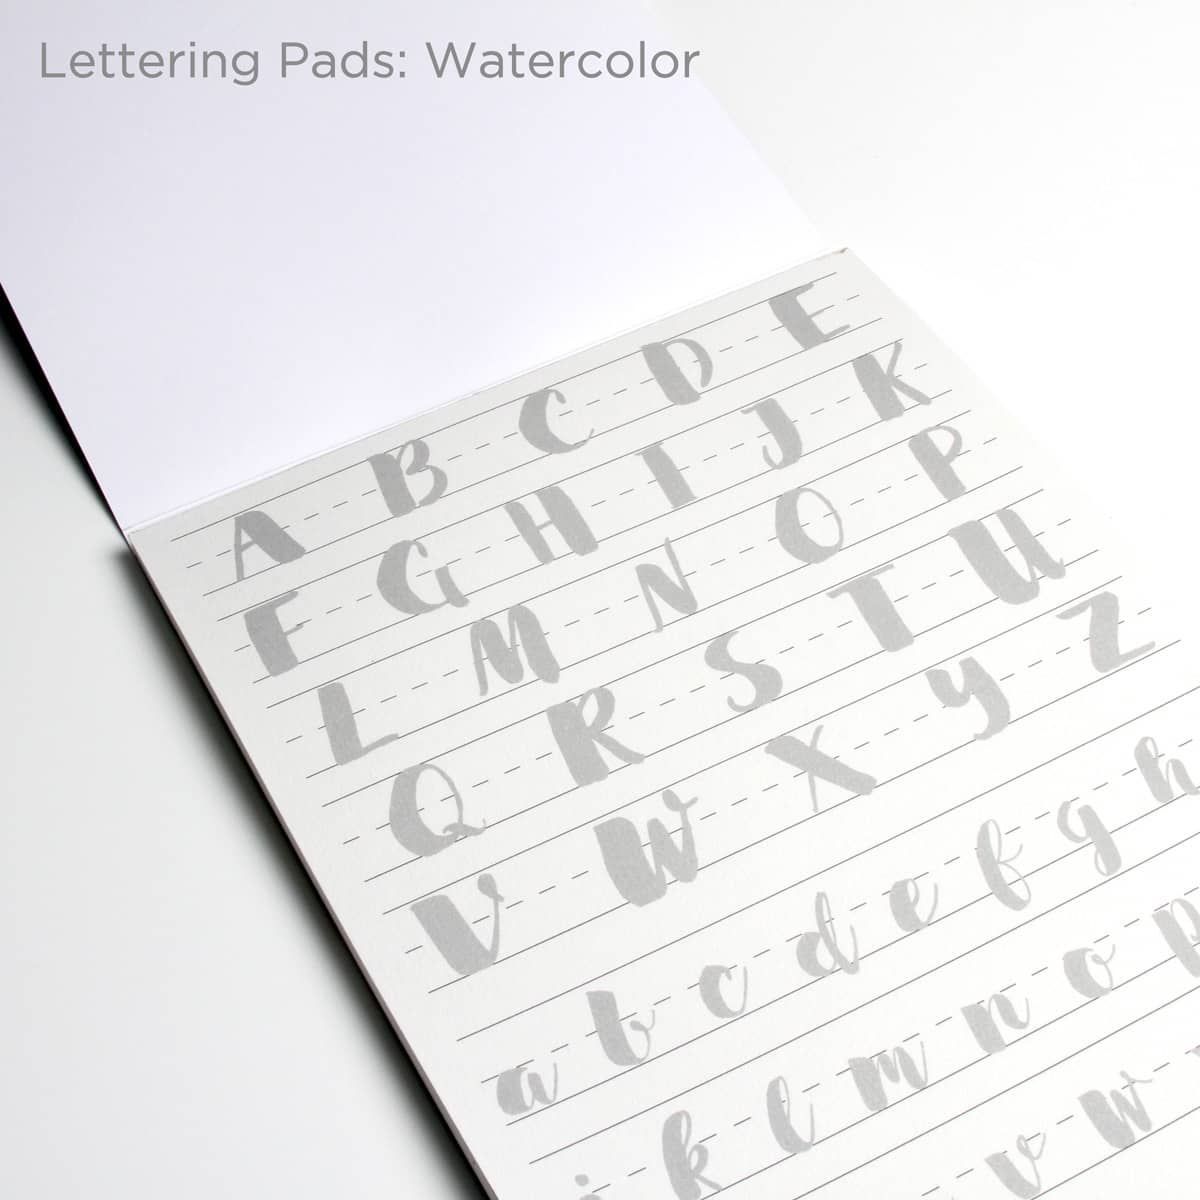 Canson Artist Series Lettering Pads Watercolor Paper